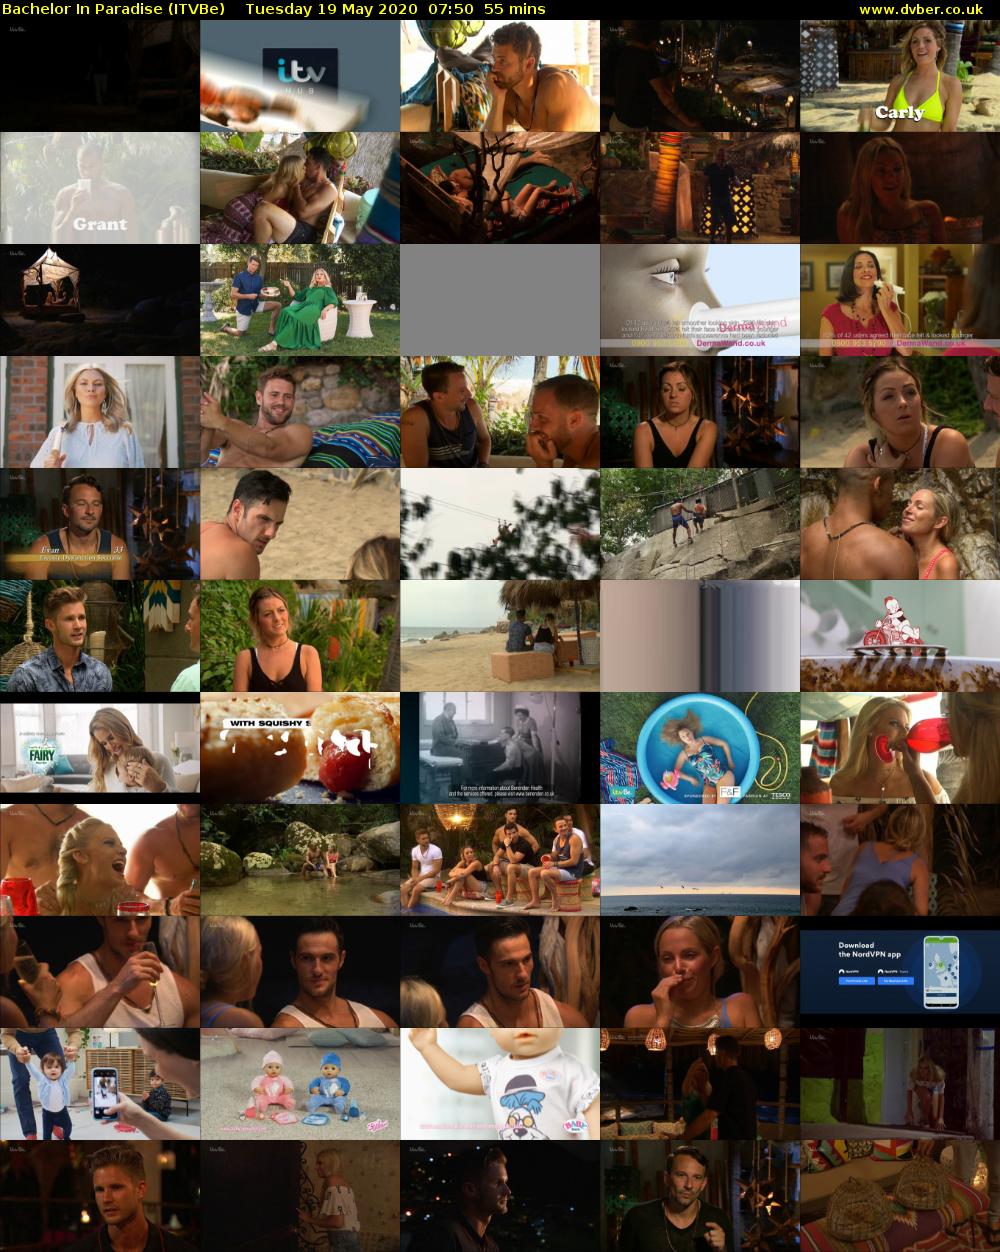 Bachelor in Paradise (ITVBe) Tuesday 19 May 2020 07:50 - 08:45